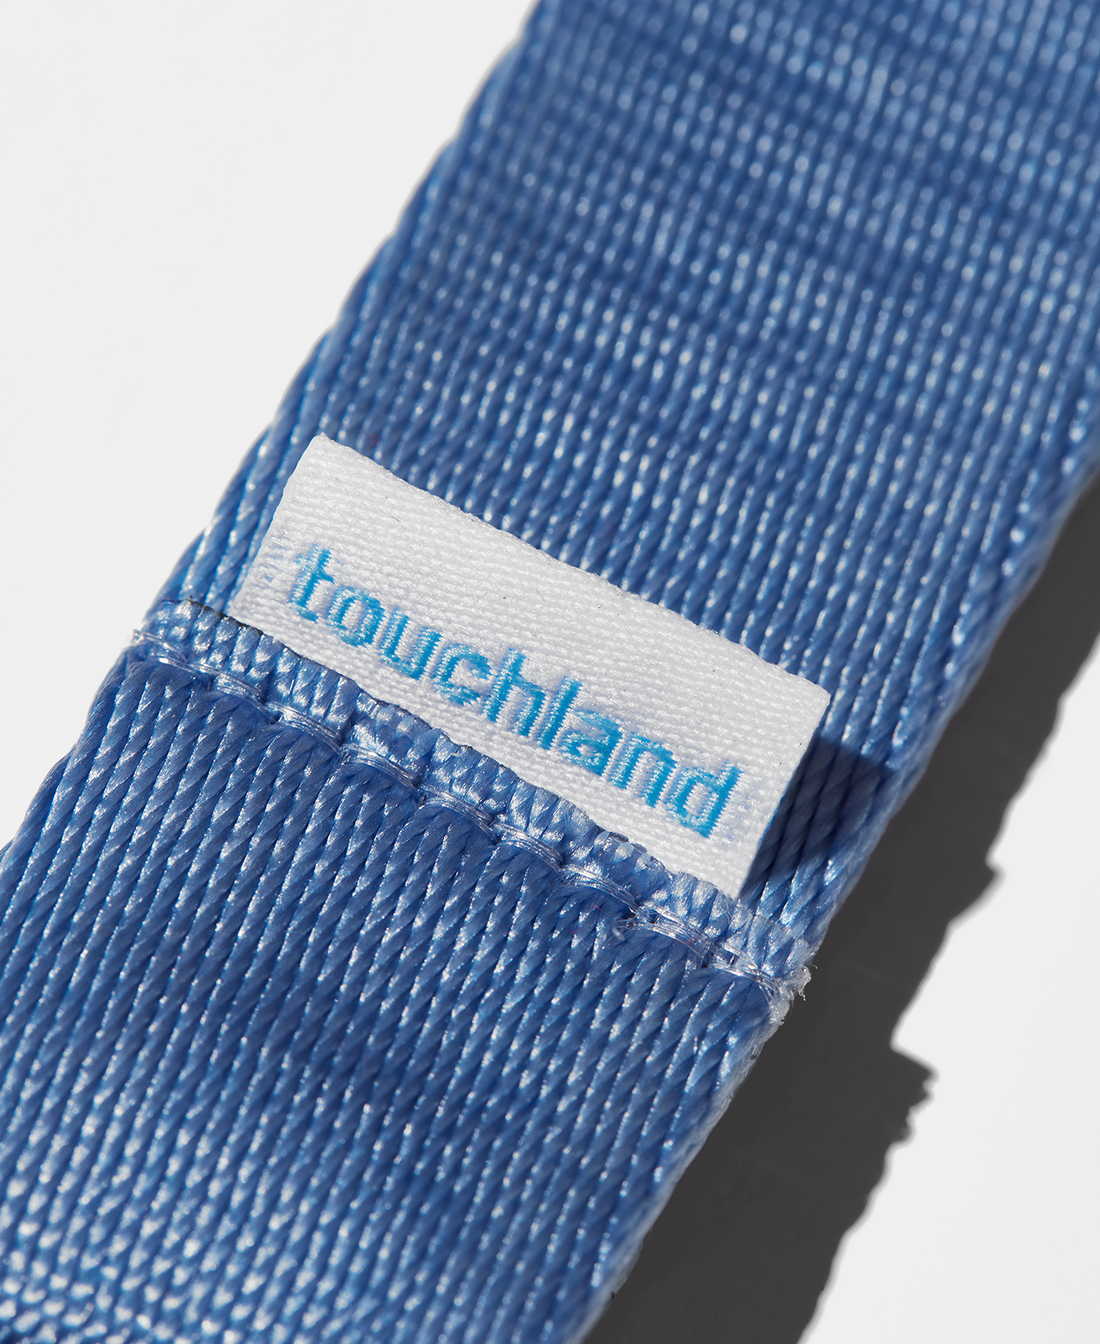 Blue lanyard zoomed in on touchland tag with white background